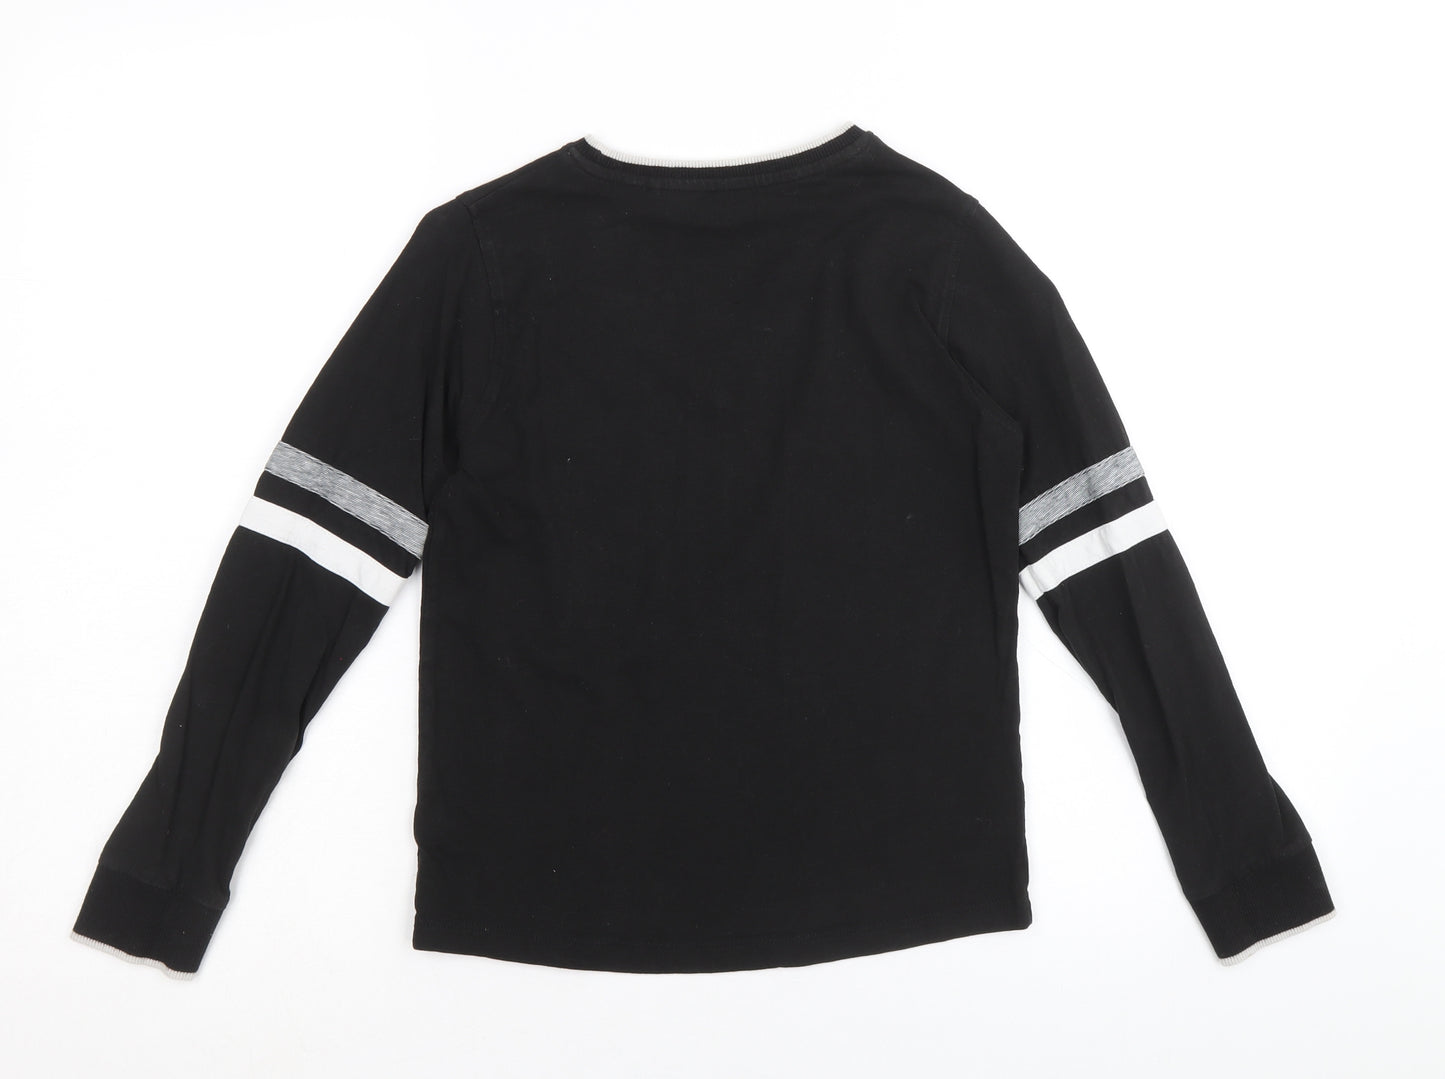 NEXT Boys Black Cotton Basic T-Shirt Size 9 Years Round Neck Pullover - Downloading...